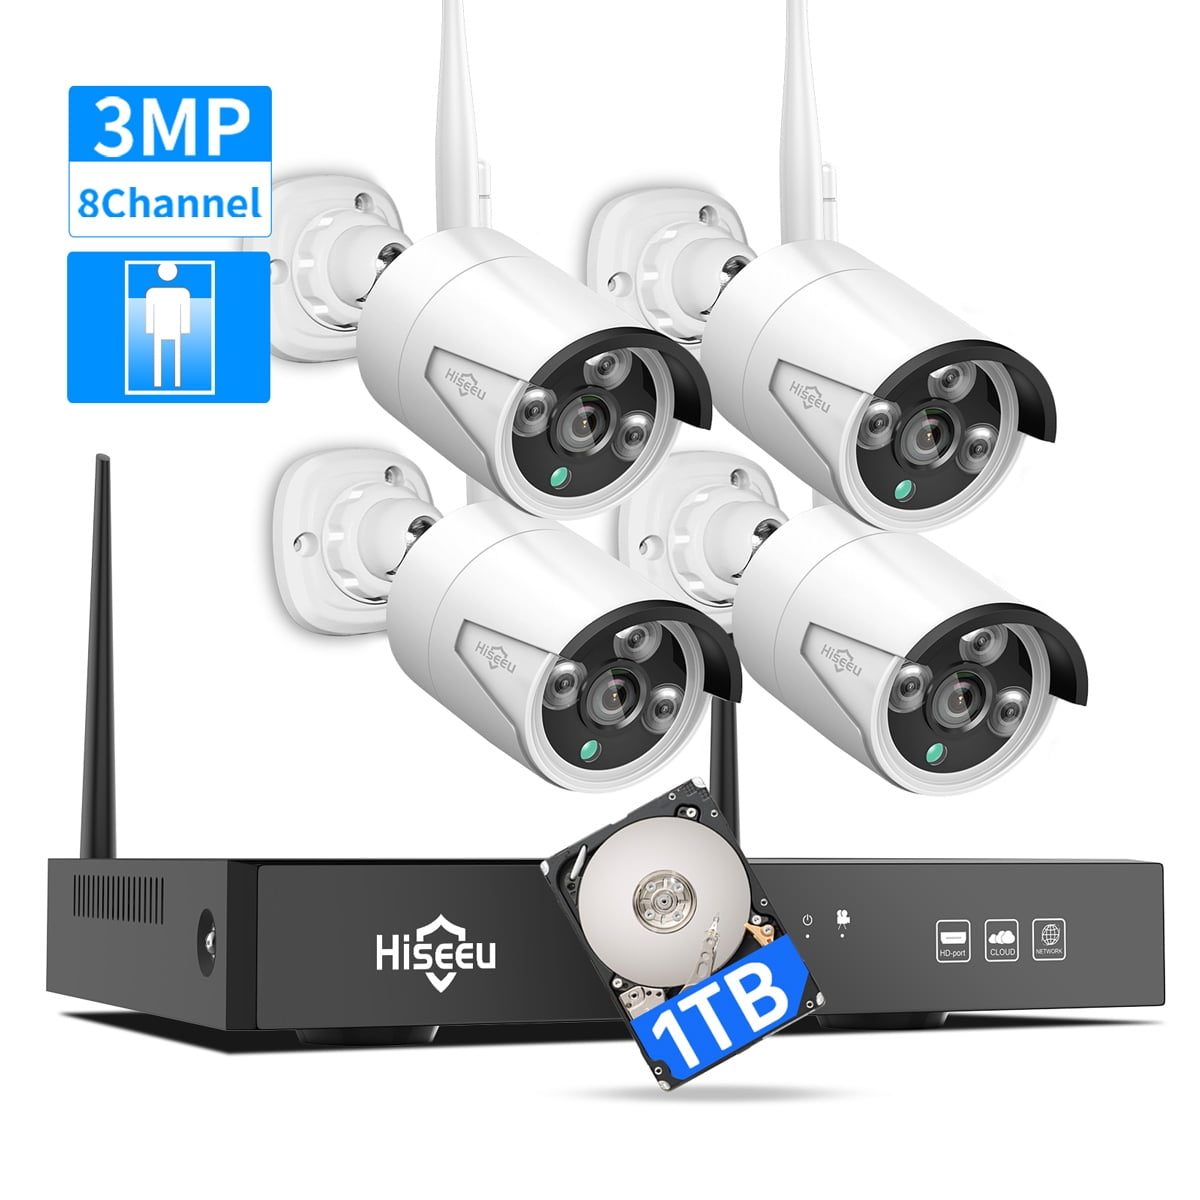 Wireless Security Camera System，Anakk 4CH 1080P Wireless NVR Security System and 4pcs 2.0MP Outdoor Home Surveillance WiFi Cameras IP66 Waterproof Night Vision,Remote Viewing Motion Detection 